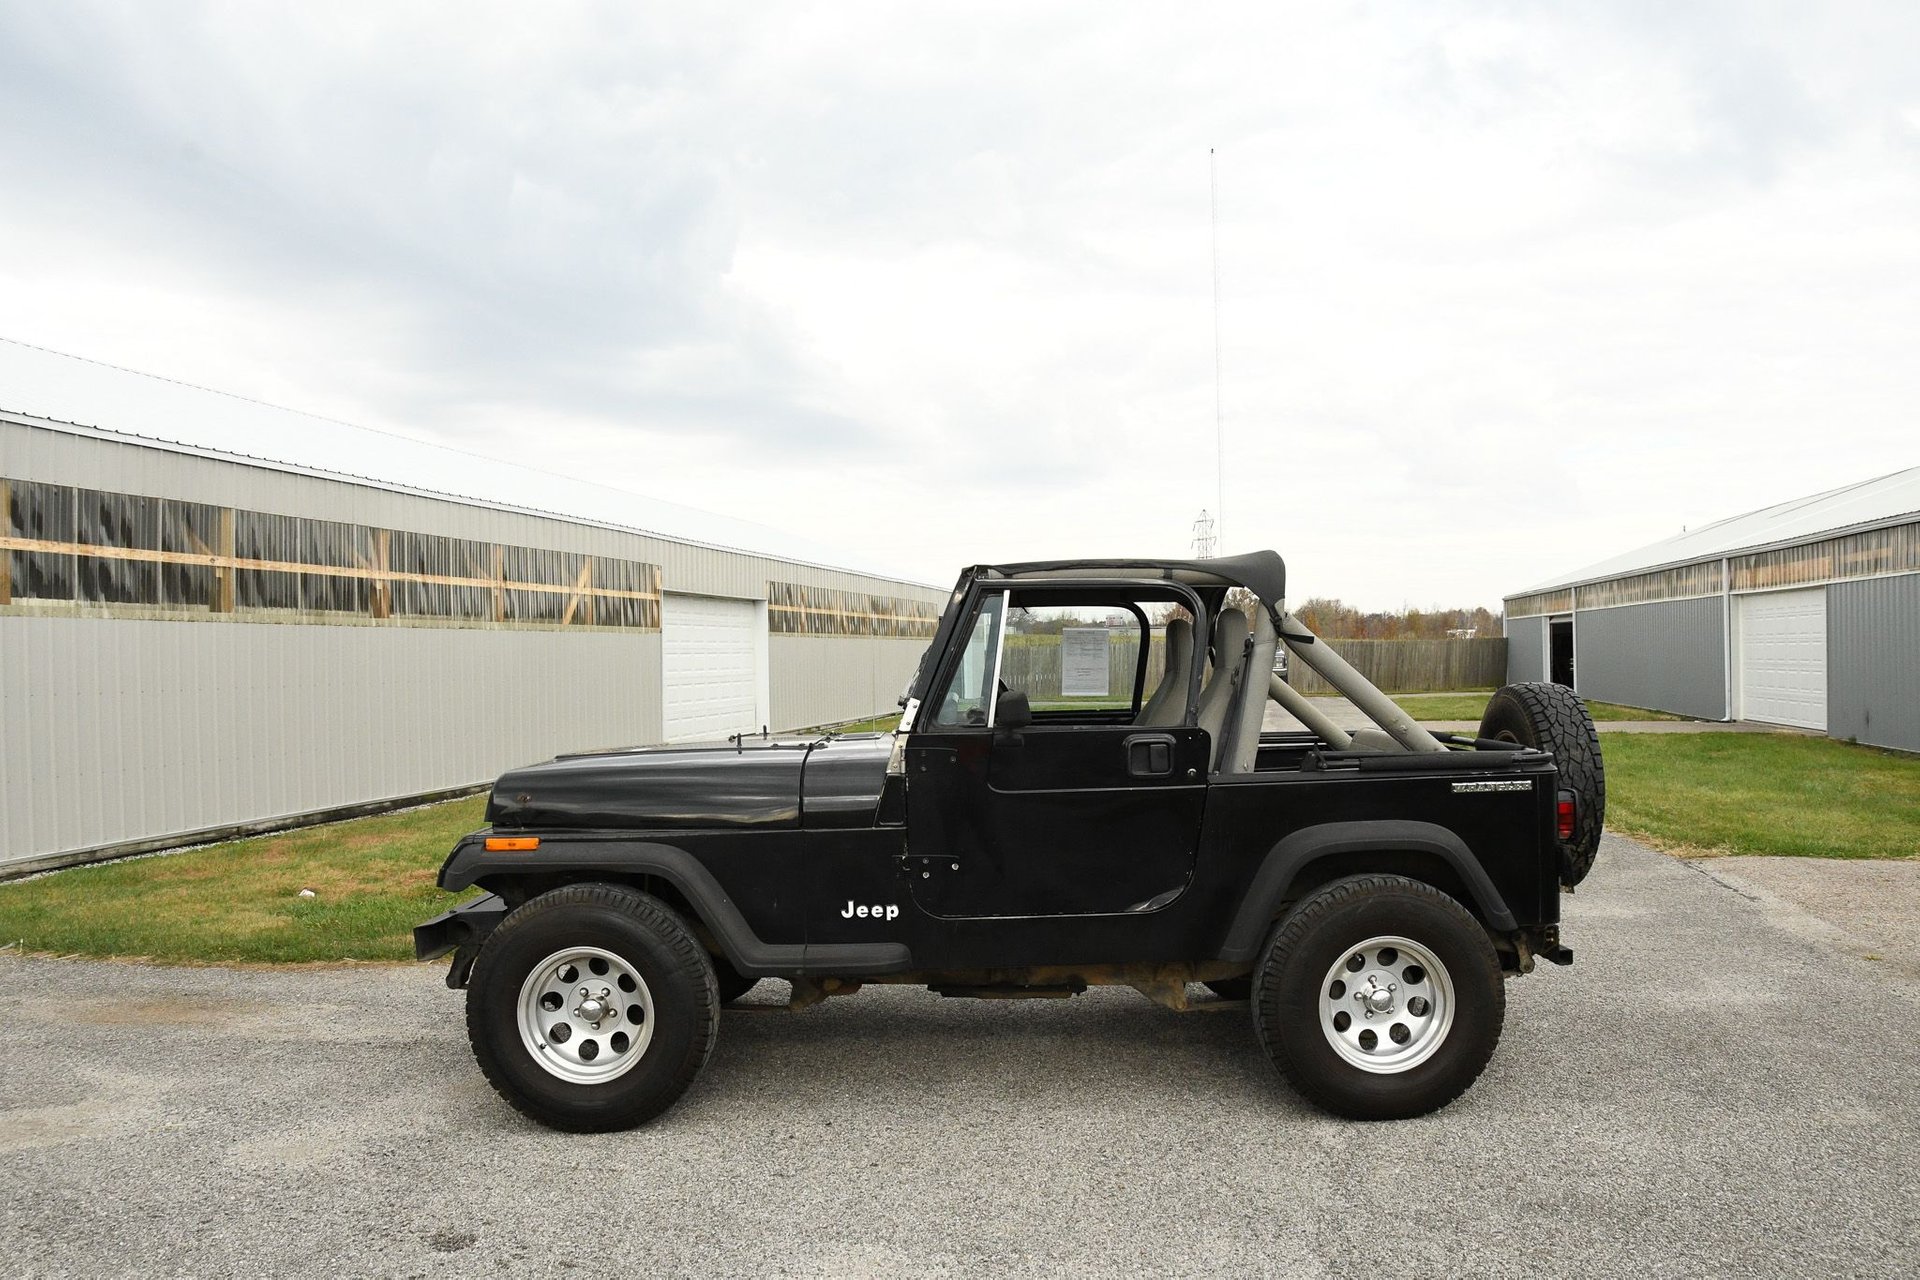 1989 Jeep Wrangler | Country Classic Cars